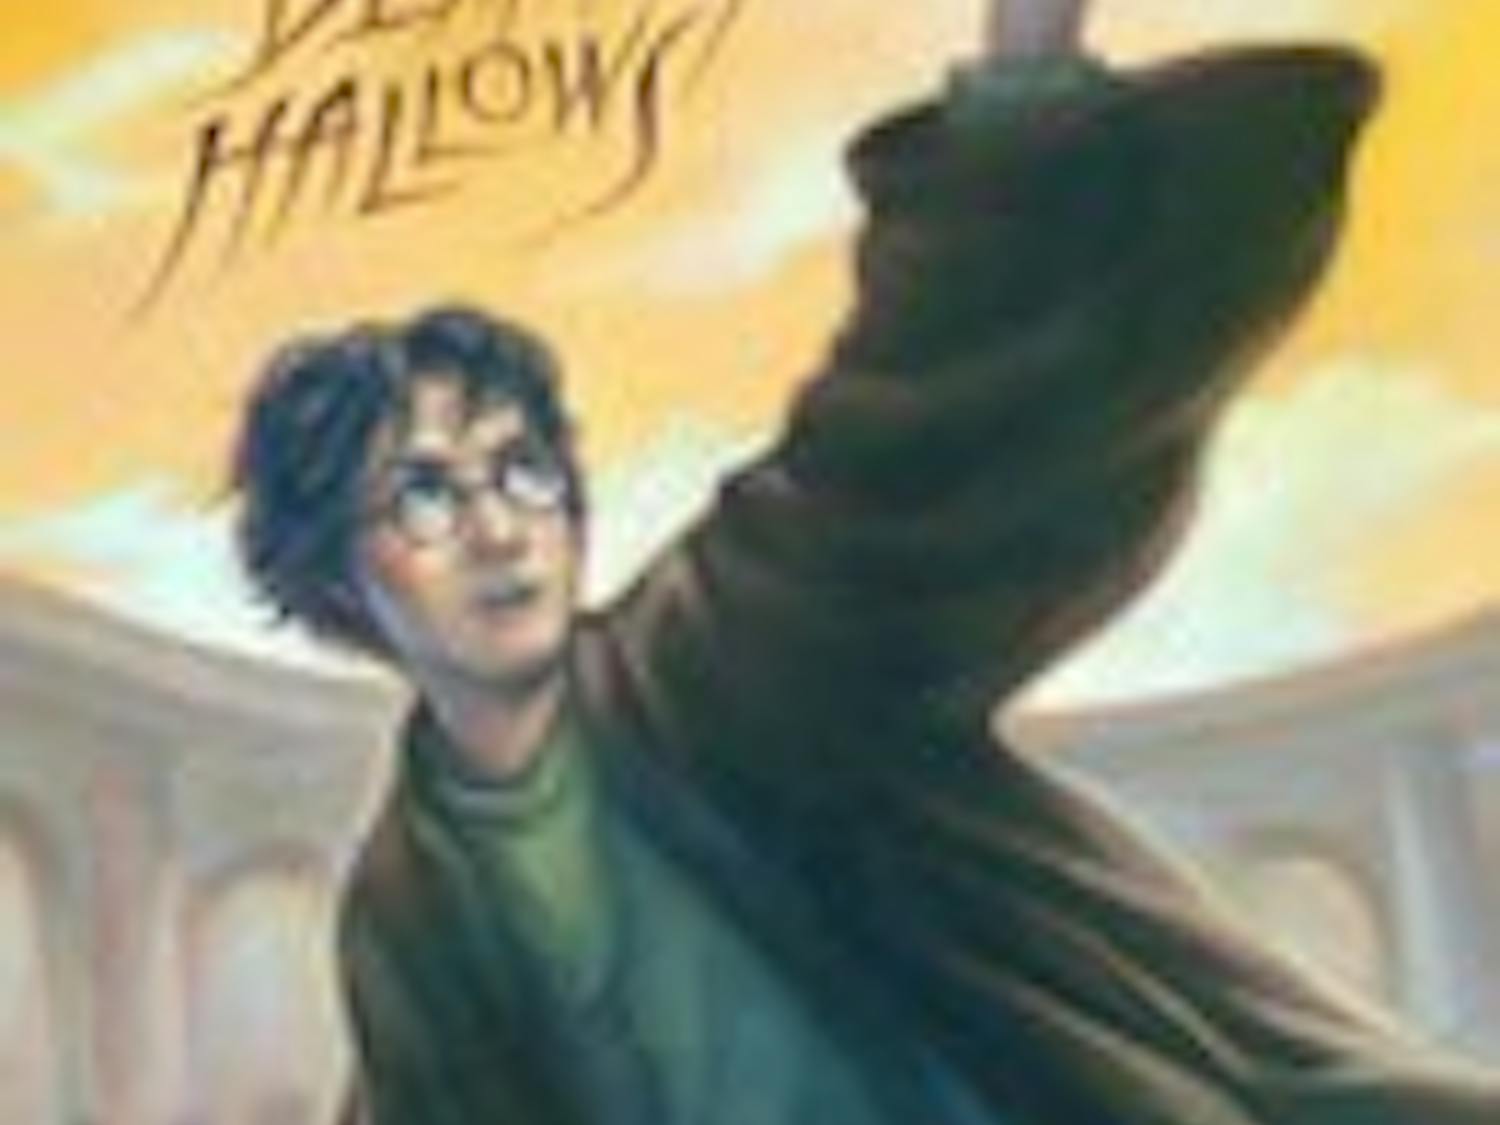 Harry Potter series shows maturity and growth with 'Deathly Hallows'